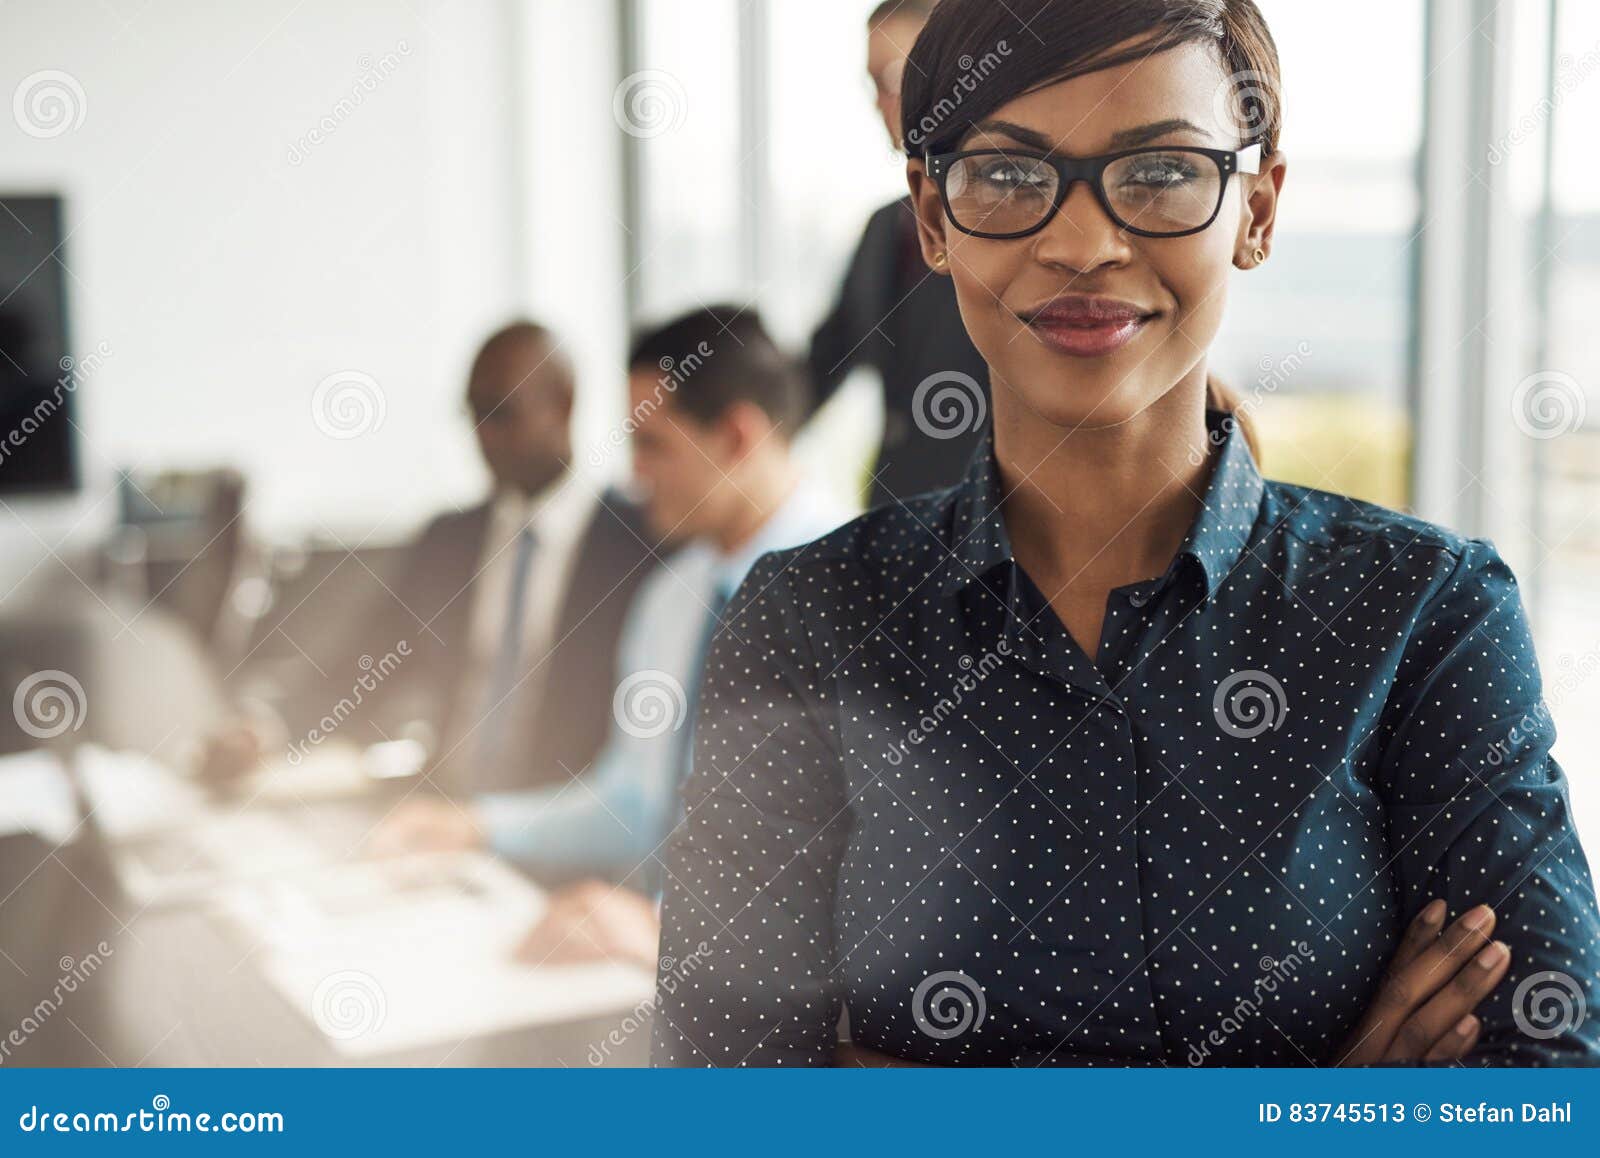 Stock Photo Young Professional Woman